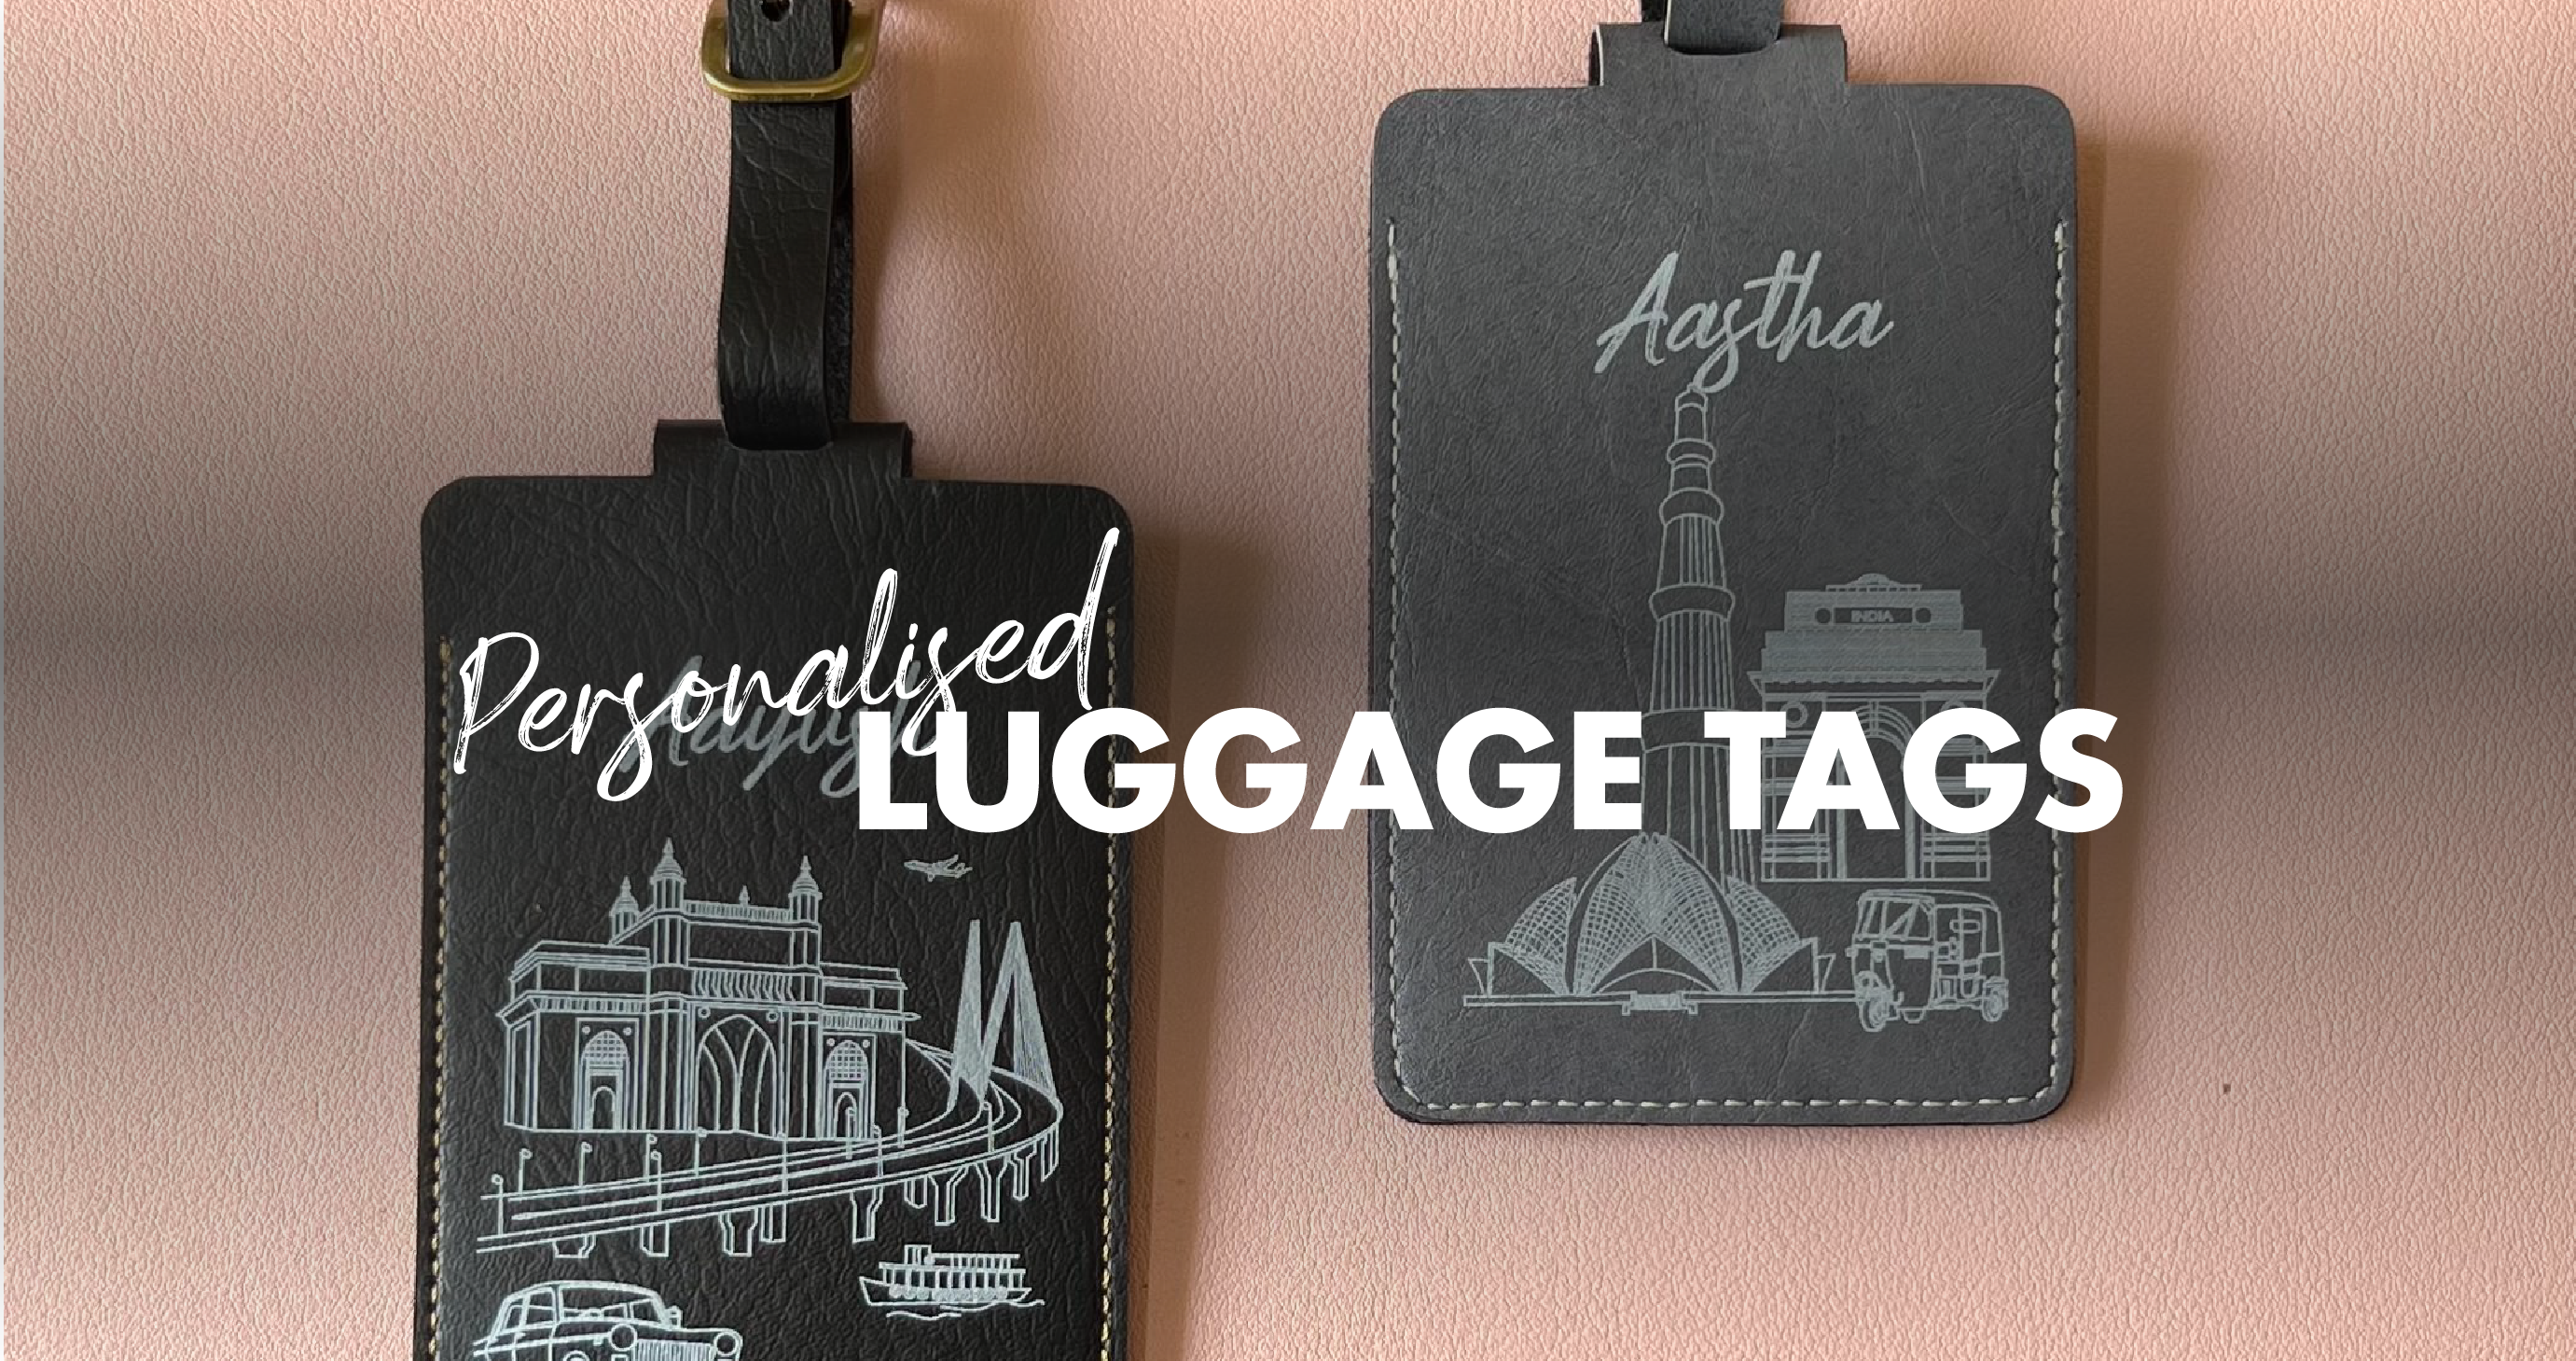 Buy Personalized Luggage Tags, Luggage Name Tag Online India| Zestpics